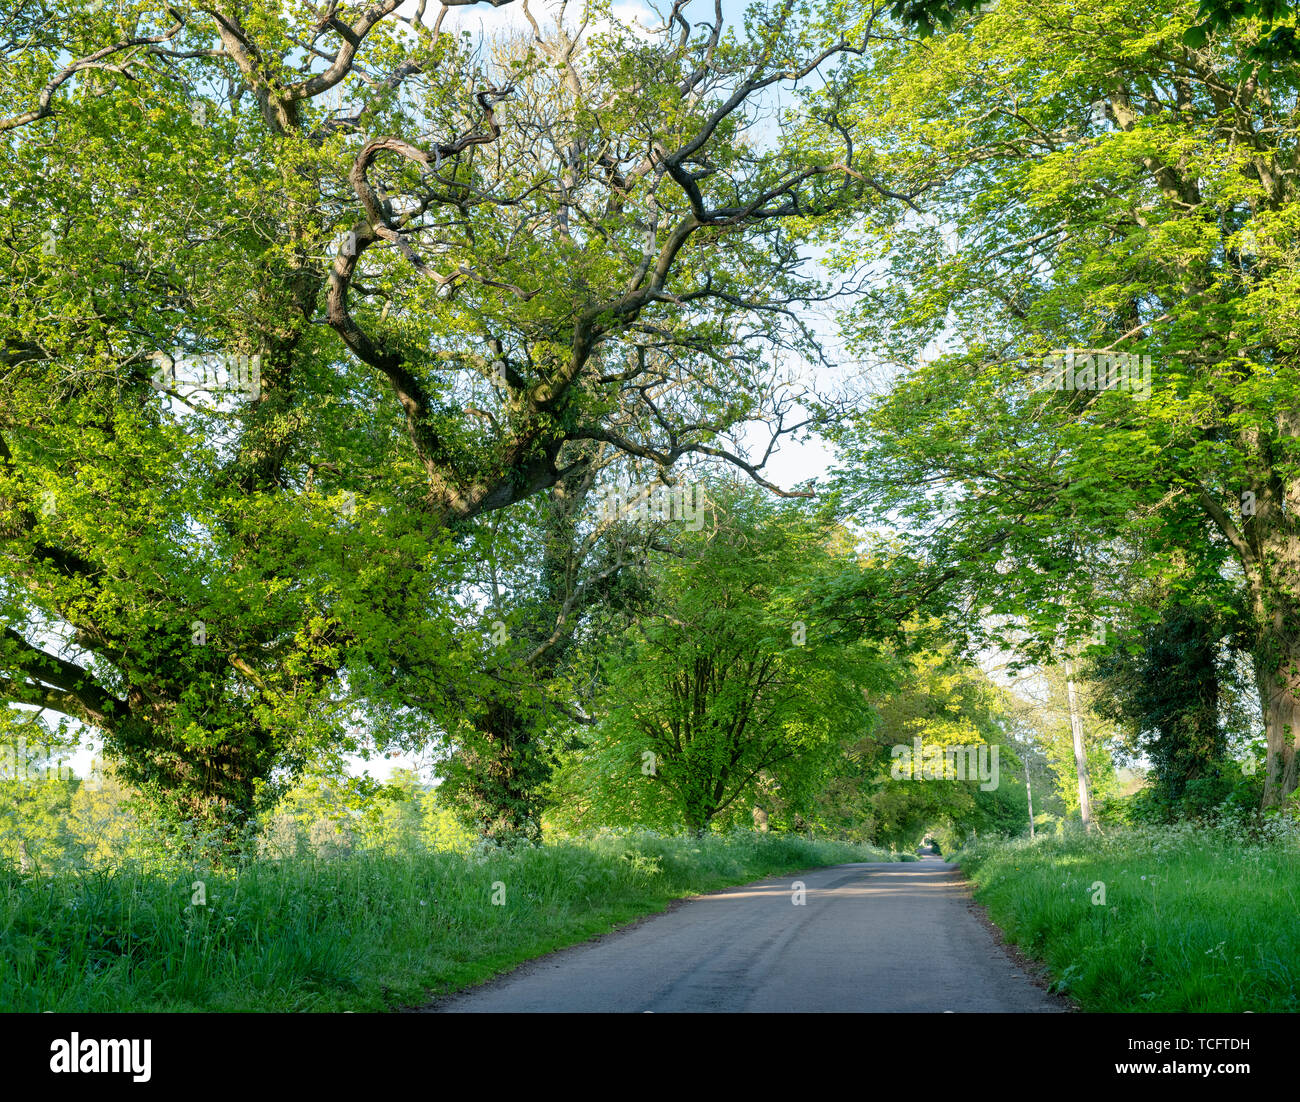 Beech and oak trees along a road in spring. Swerford, Cotswolds, Oxfordshire, England Stock Photo